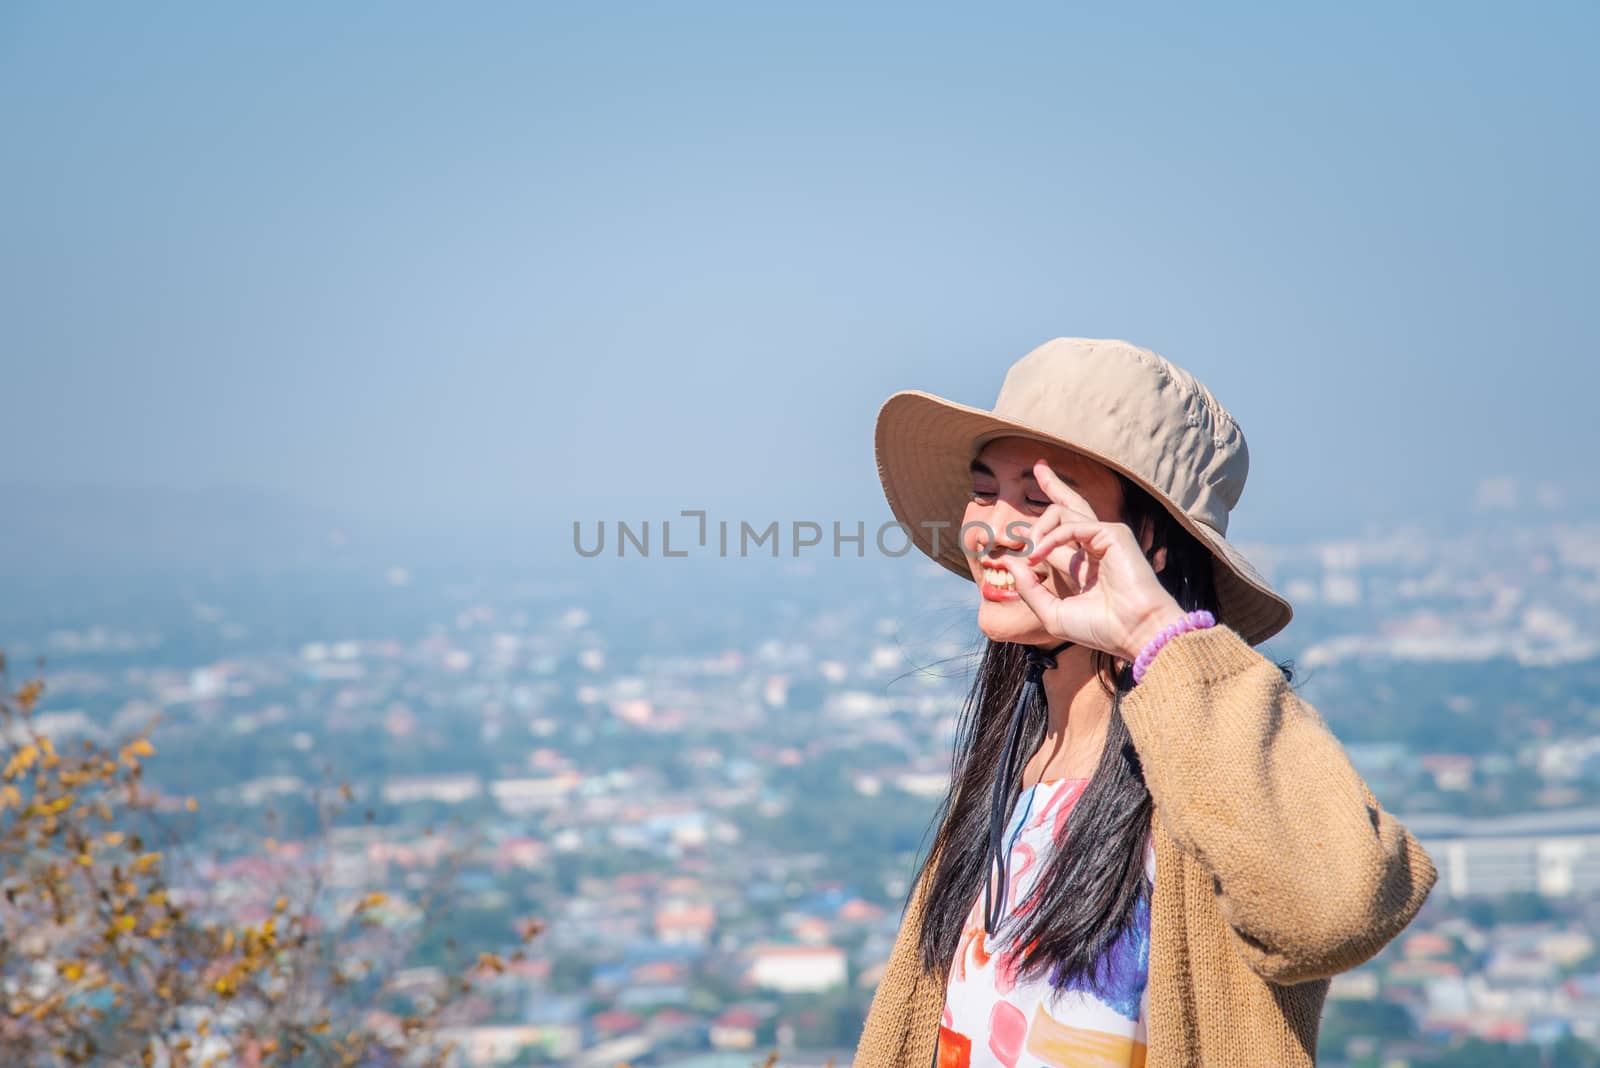 Woman relax at landscape viewpoint on mountain by PongMoji